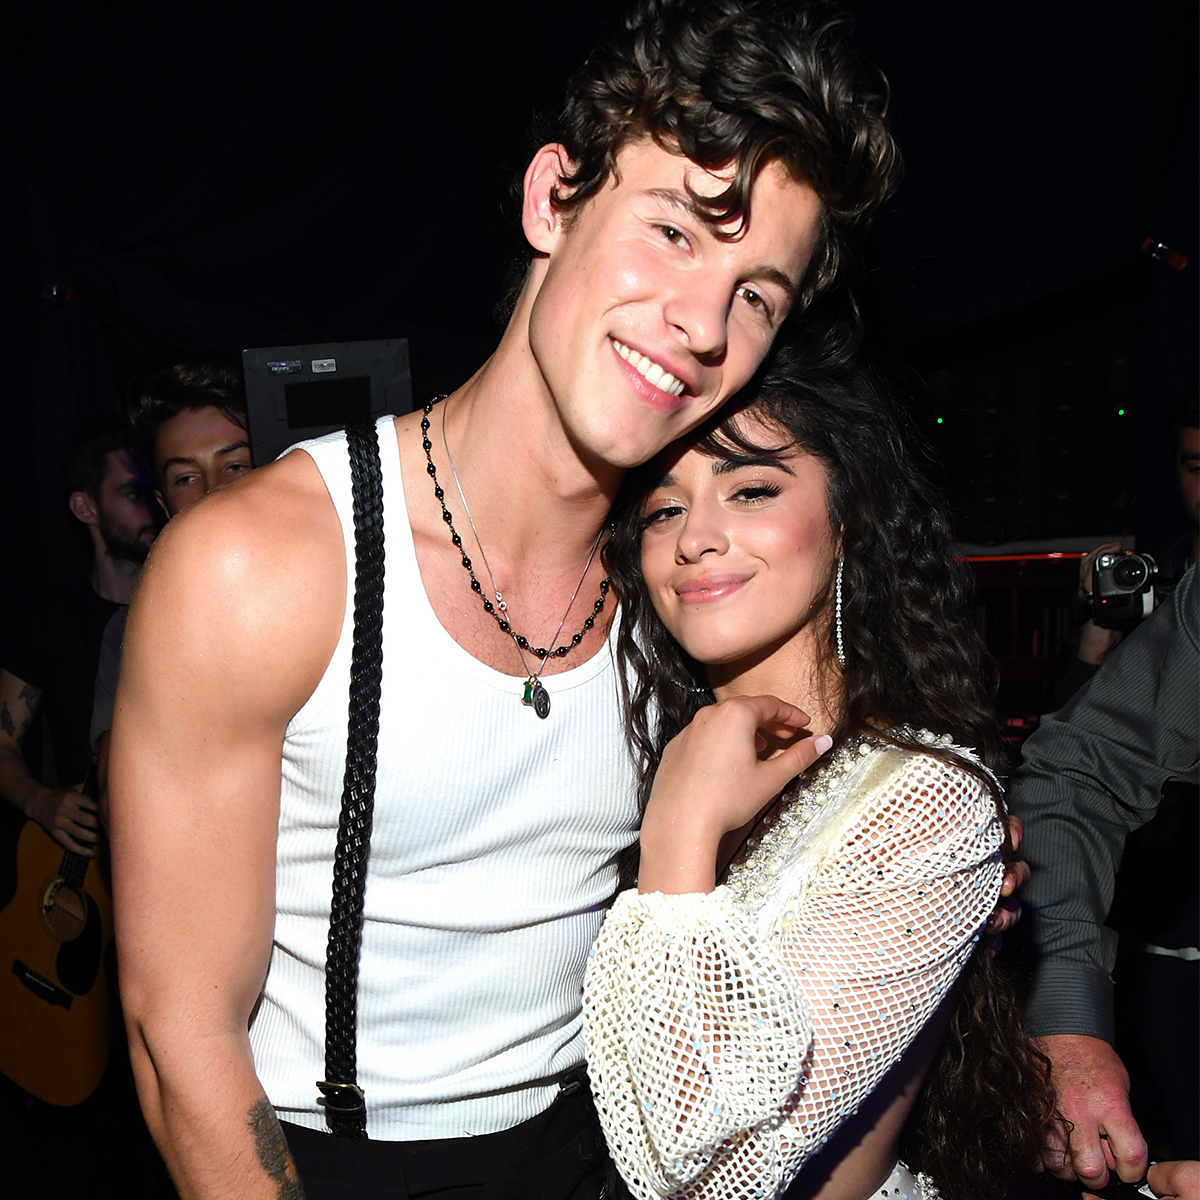 Shawn Mendes and Camila Cabello Are Enchanting at Taylor Swift Concert